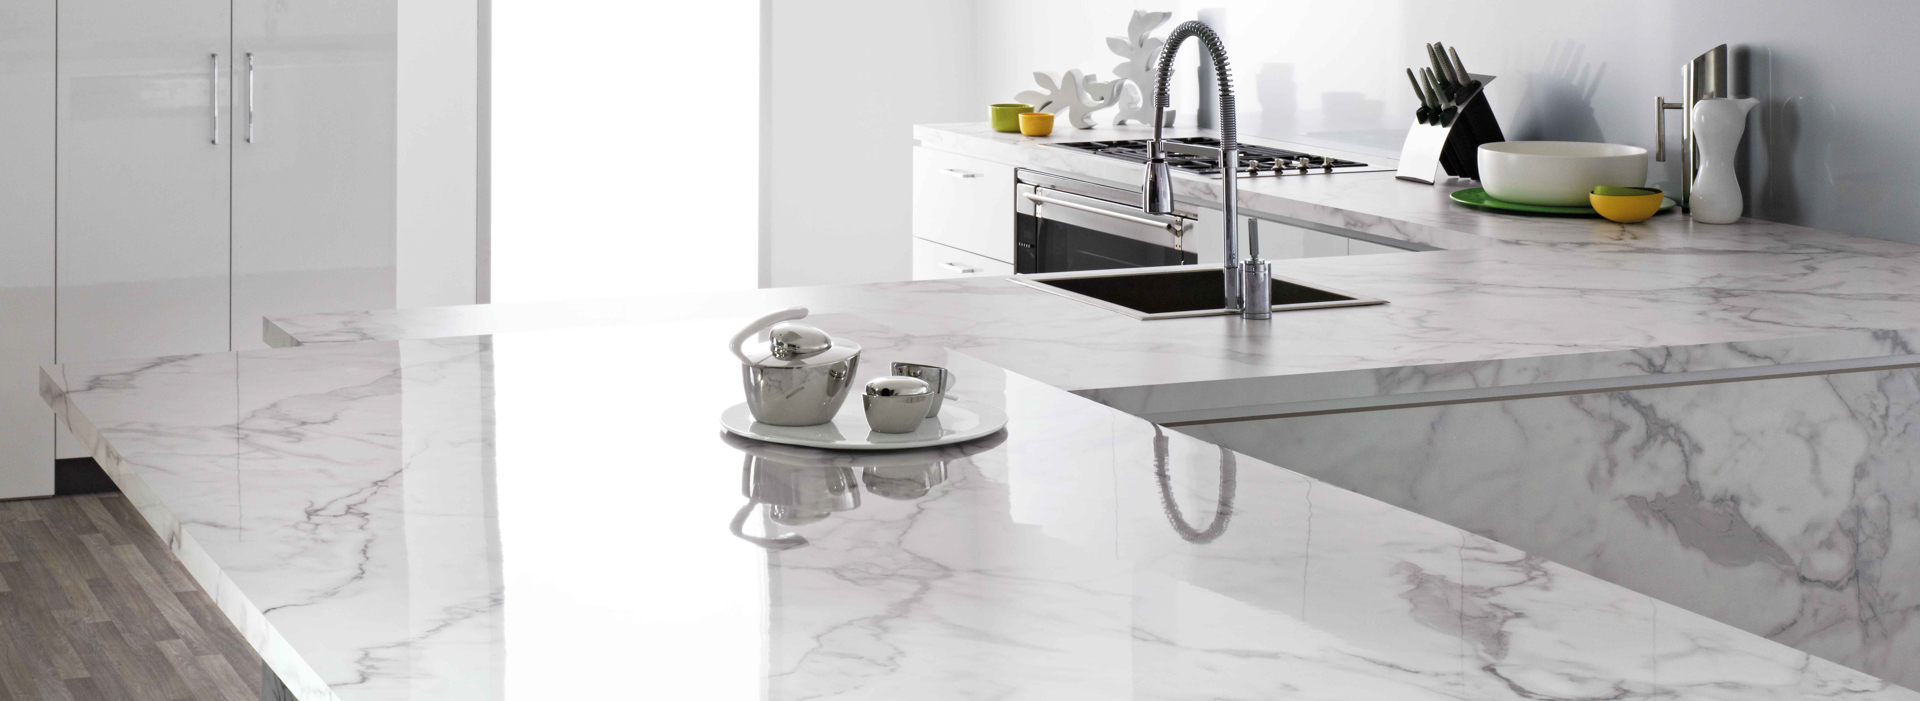 Kitchen countertops in Formica® 180fx® laminate Calacatta marble 3460-90